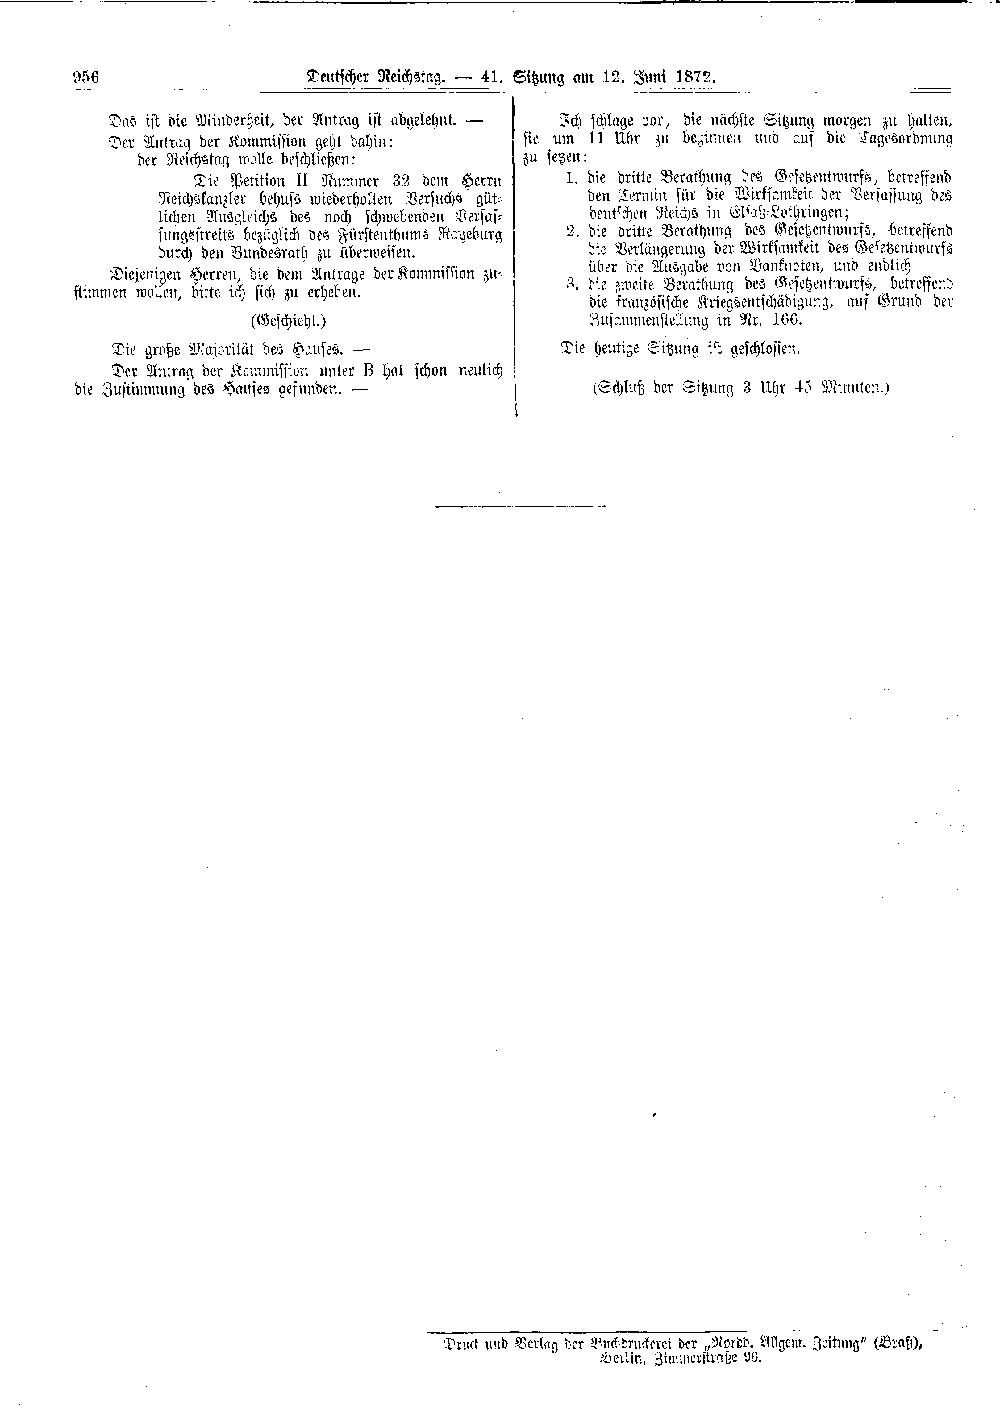 Scan of page 956